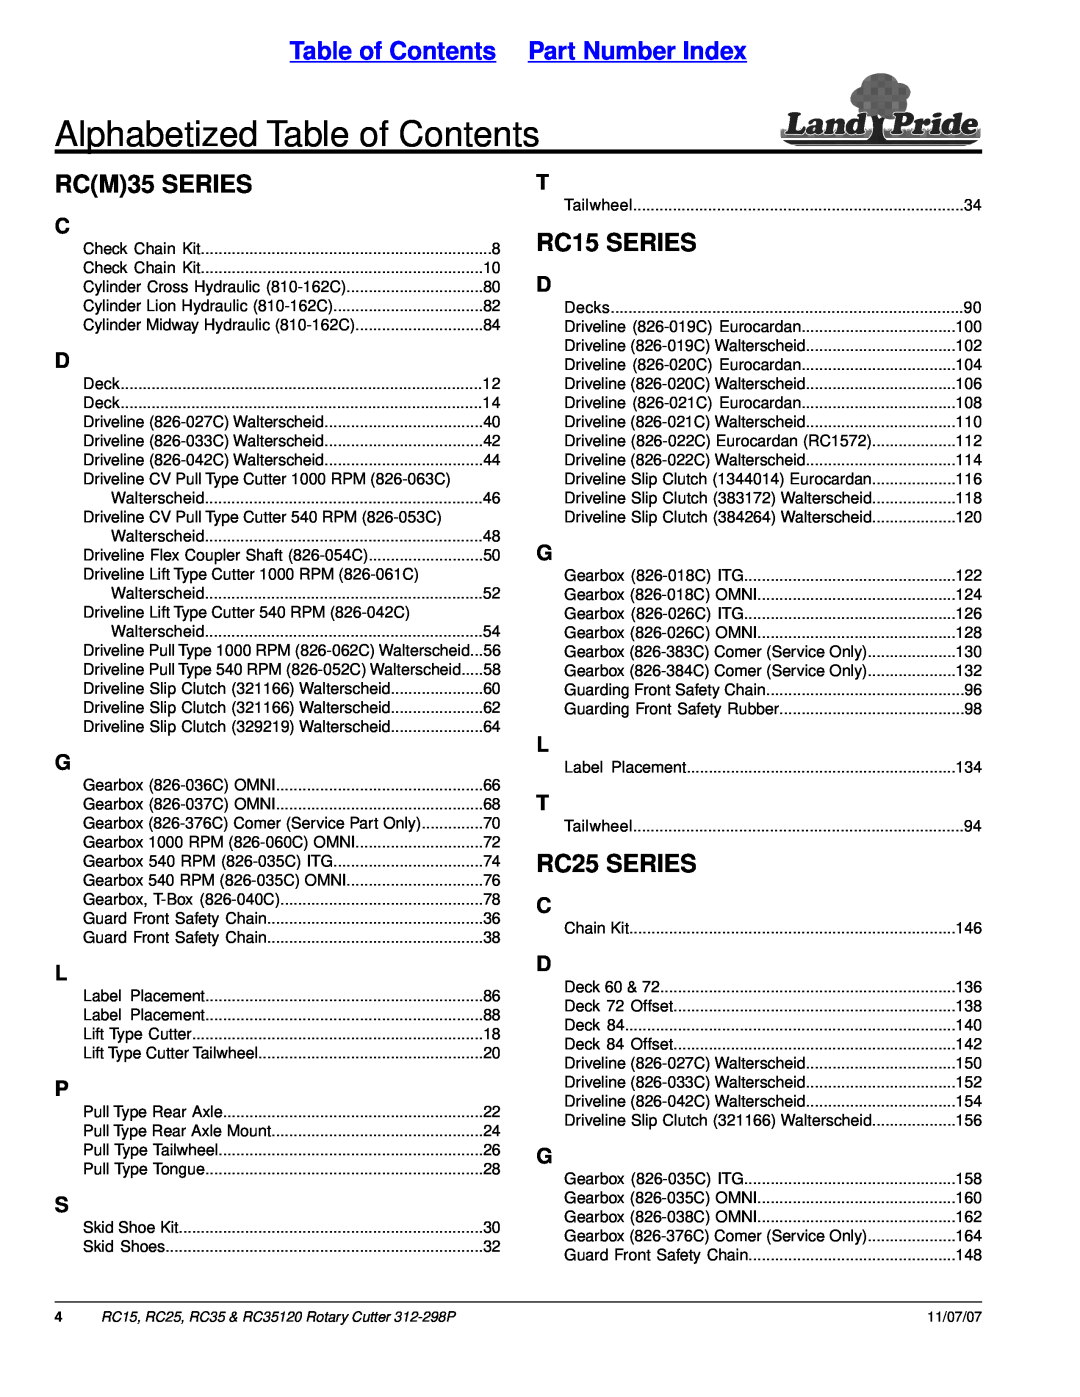 Land Pride RC35120, RC25 Alphabetized Table of Contents, Table of Contents Part Number Index, RCM35 SERIES, RC15 SERIES 